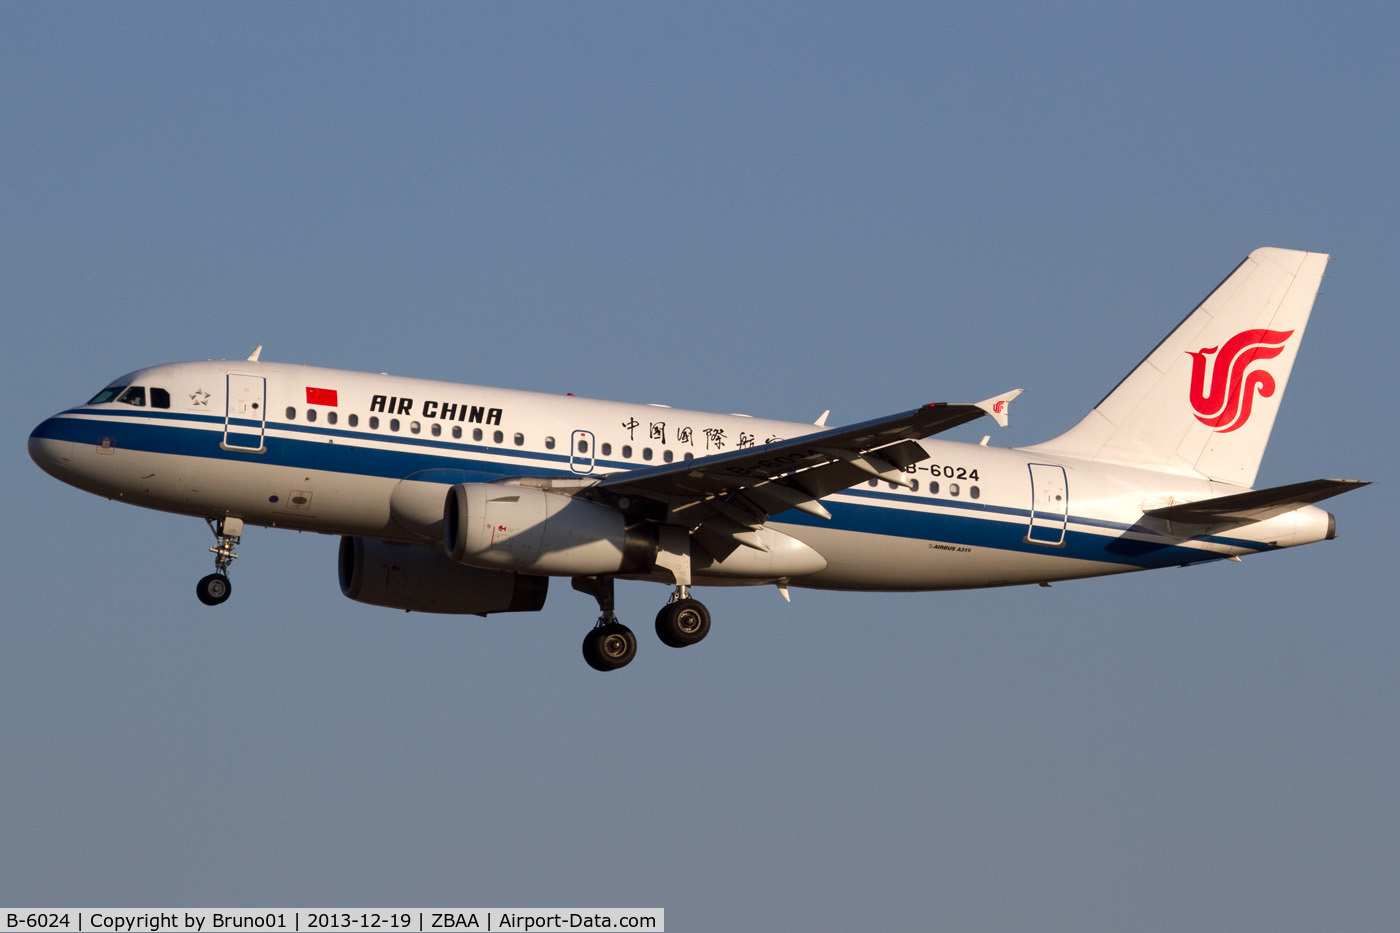 B-6024, 2003 Airbus A319-131 C/N 2015, seen approach to Beijing